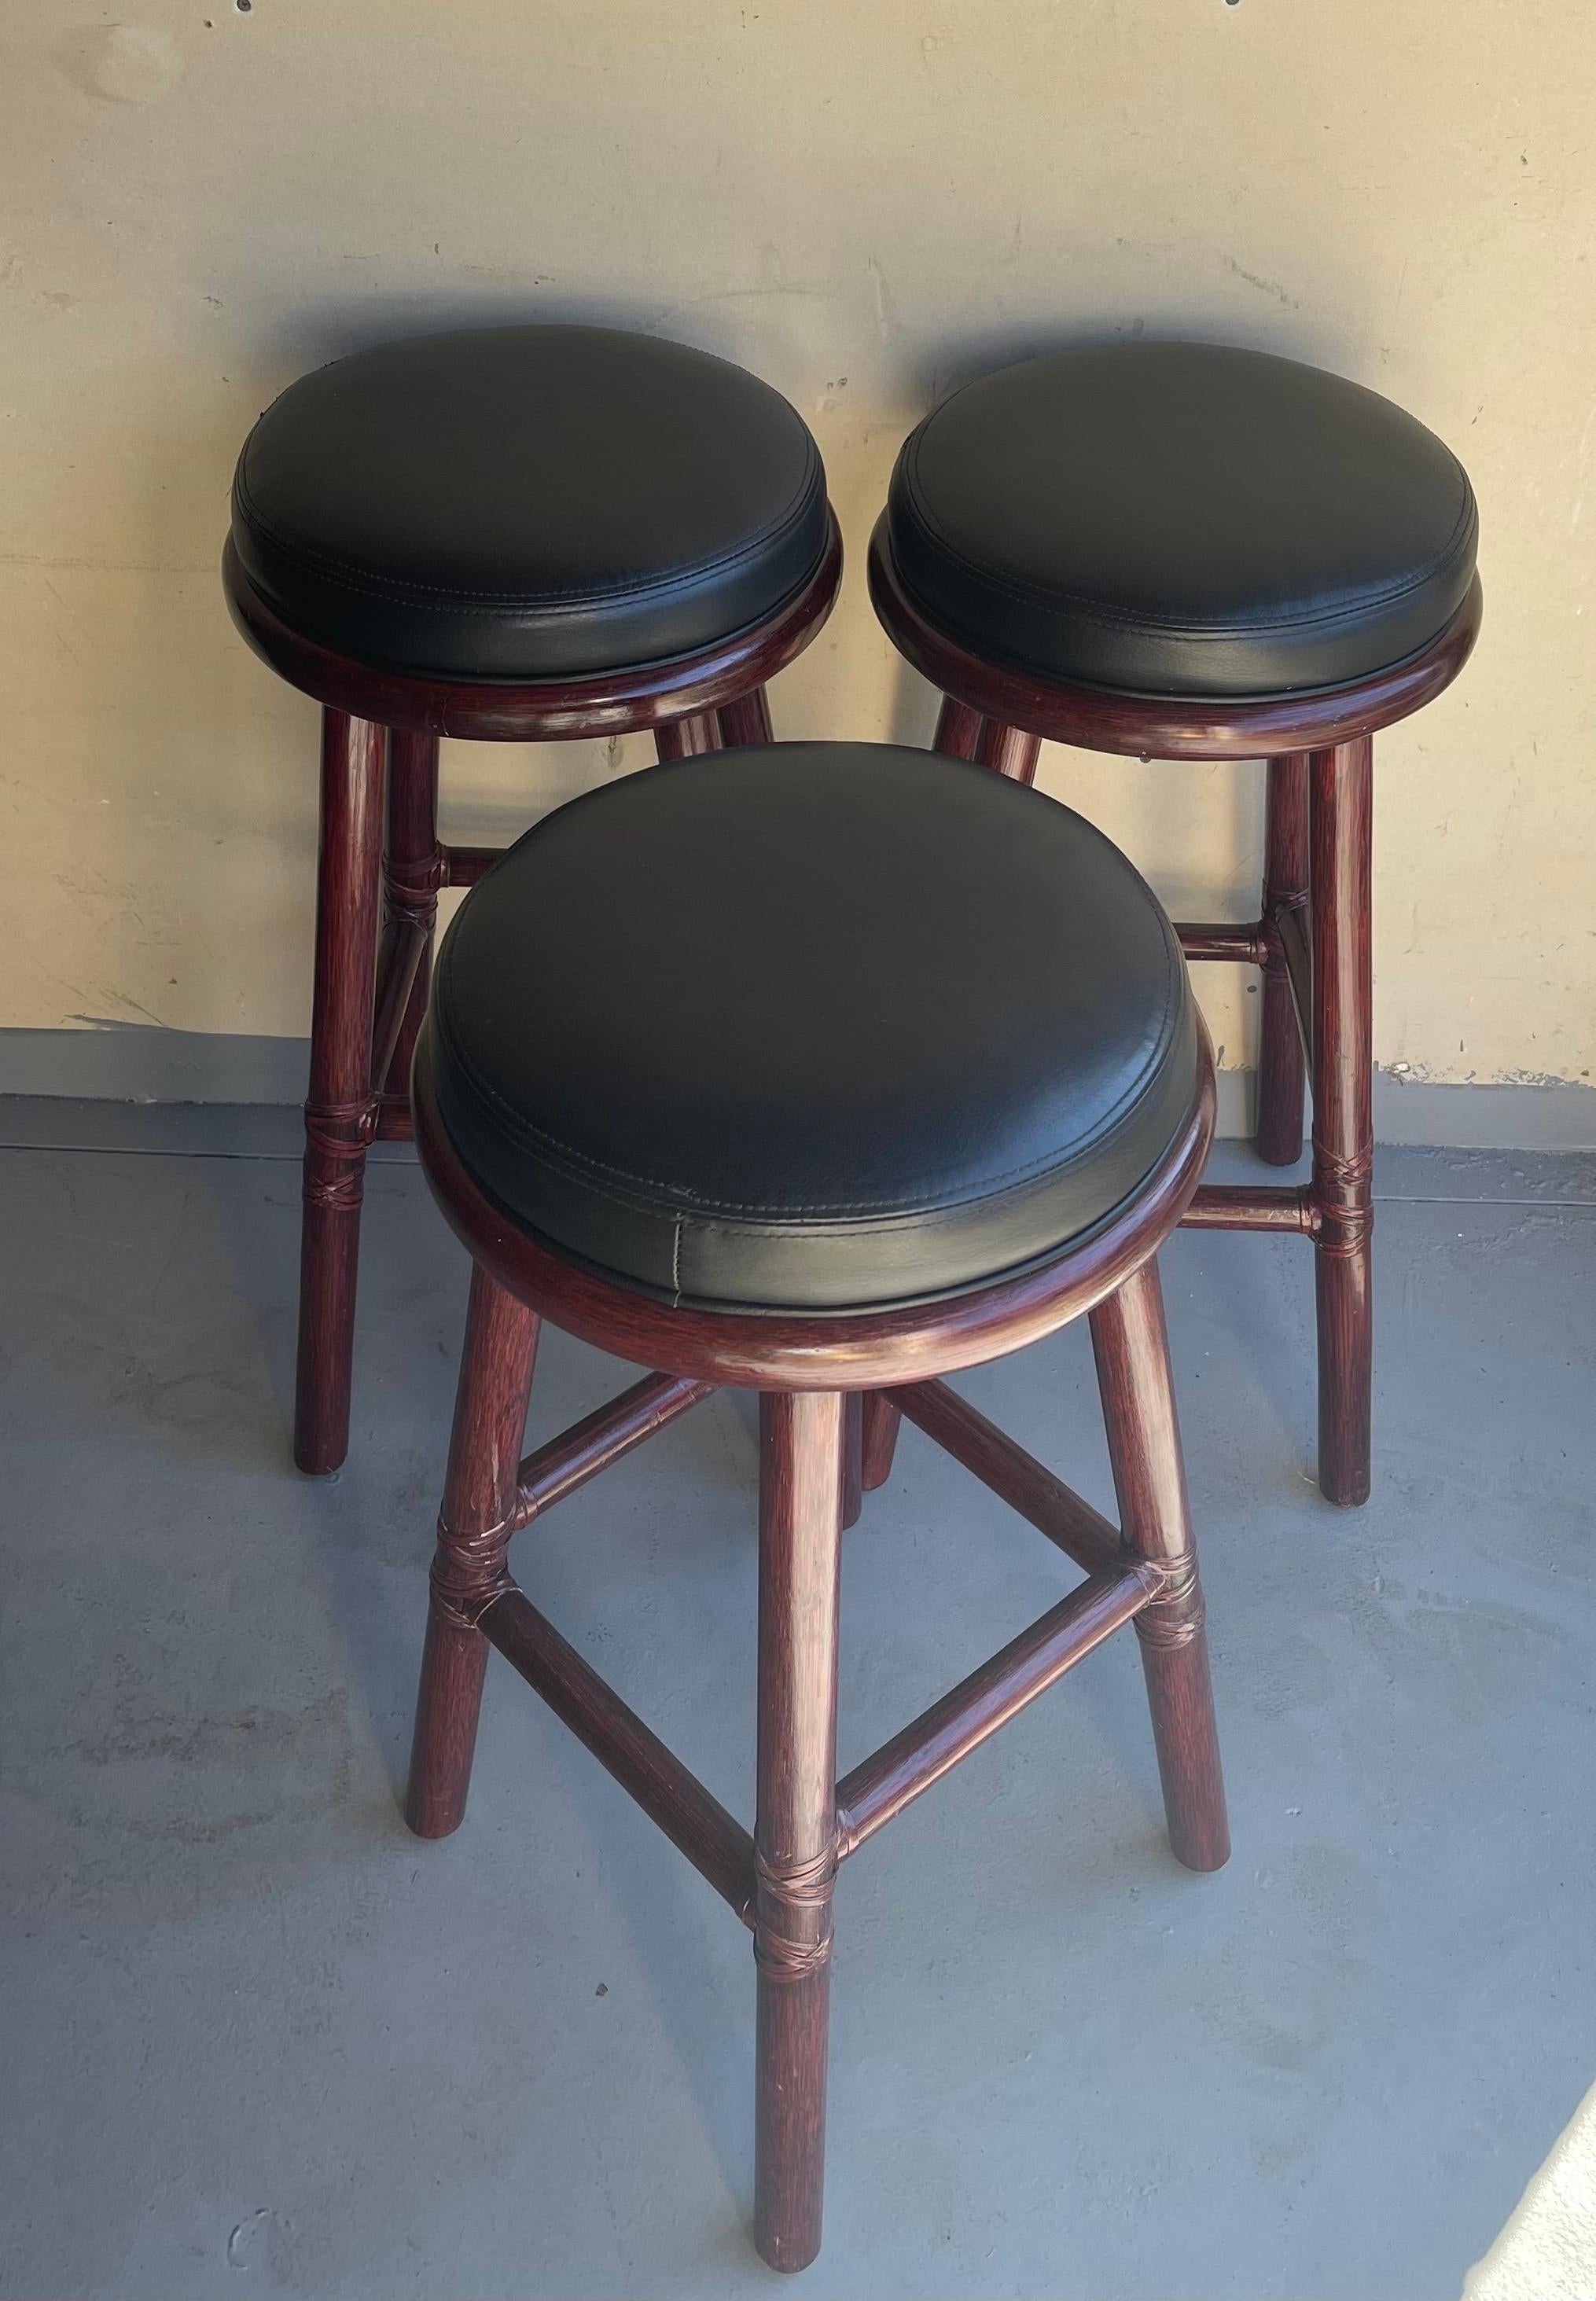 American Set of Three Bamboo & Leather Bar Stools by McGuire Furniture Co. For Sale